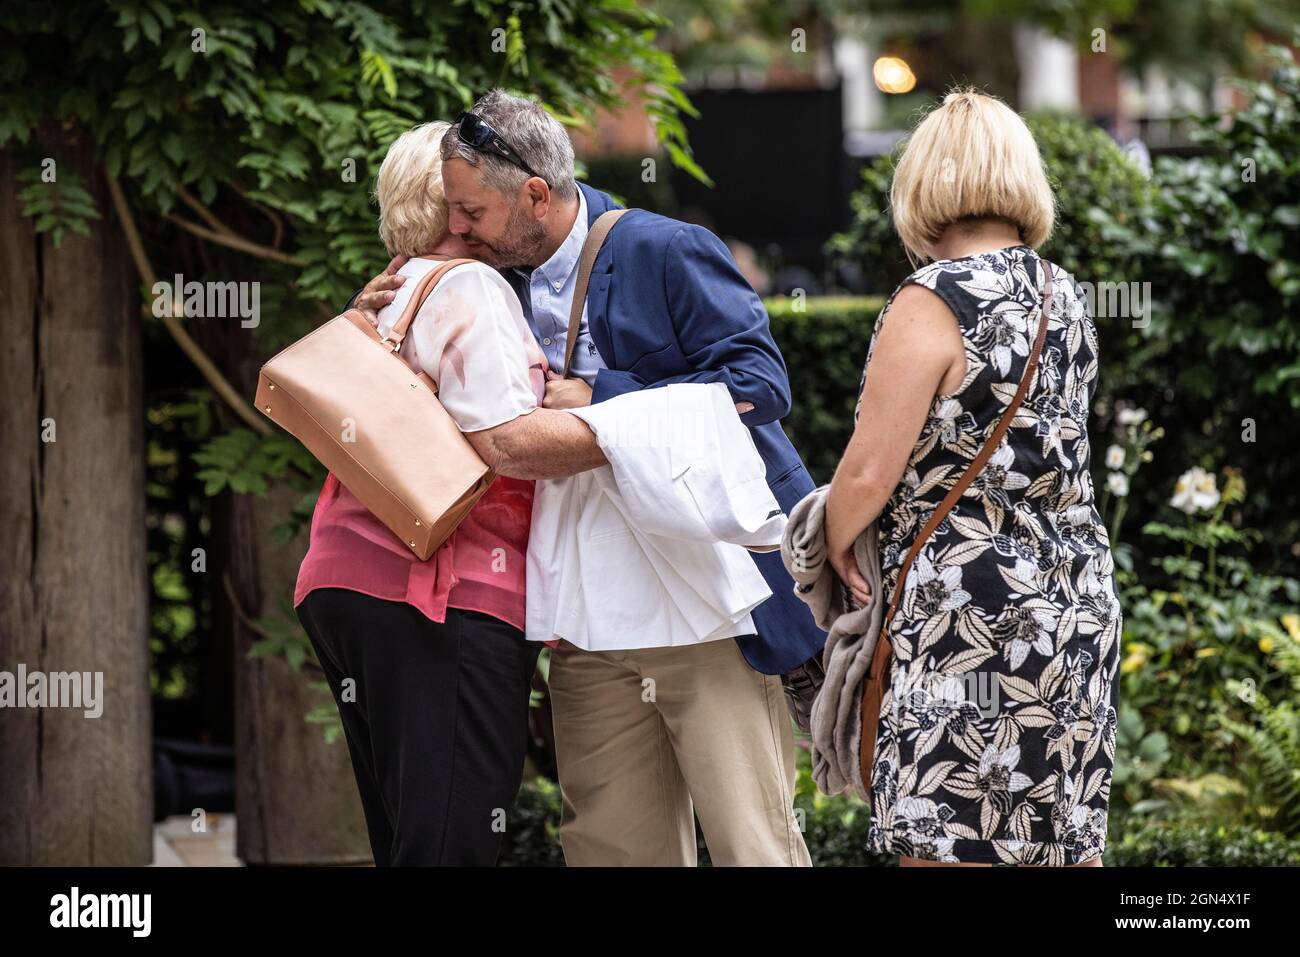 Families pay their respects at the September 11 Memorial Garden in London's Grosvenor Square on the 20th Anniversary of the 9/11 terrorist attacks. Stock Photo